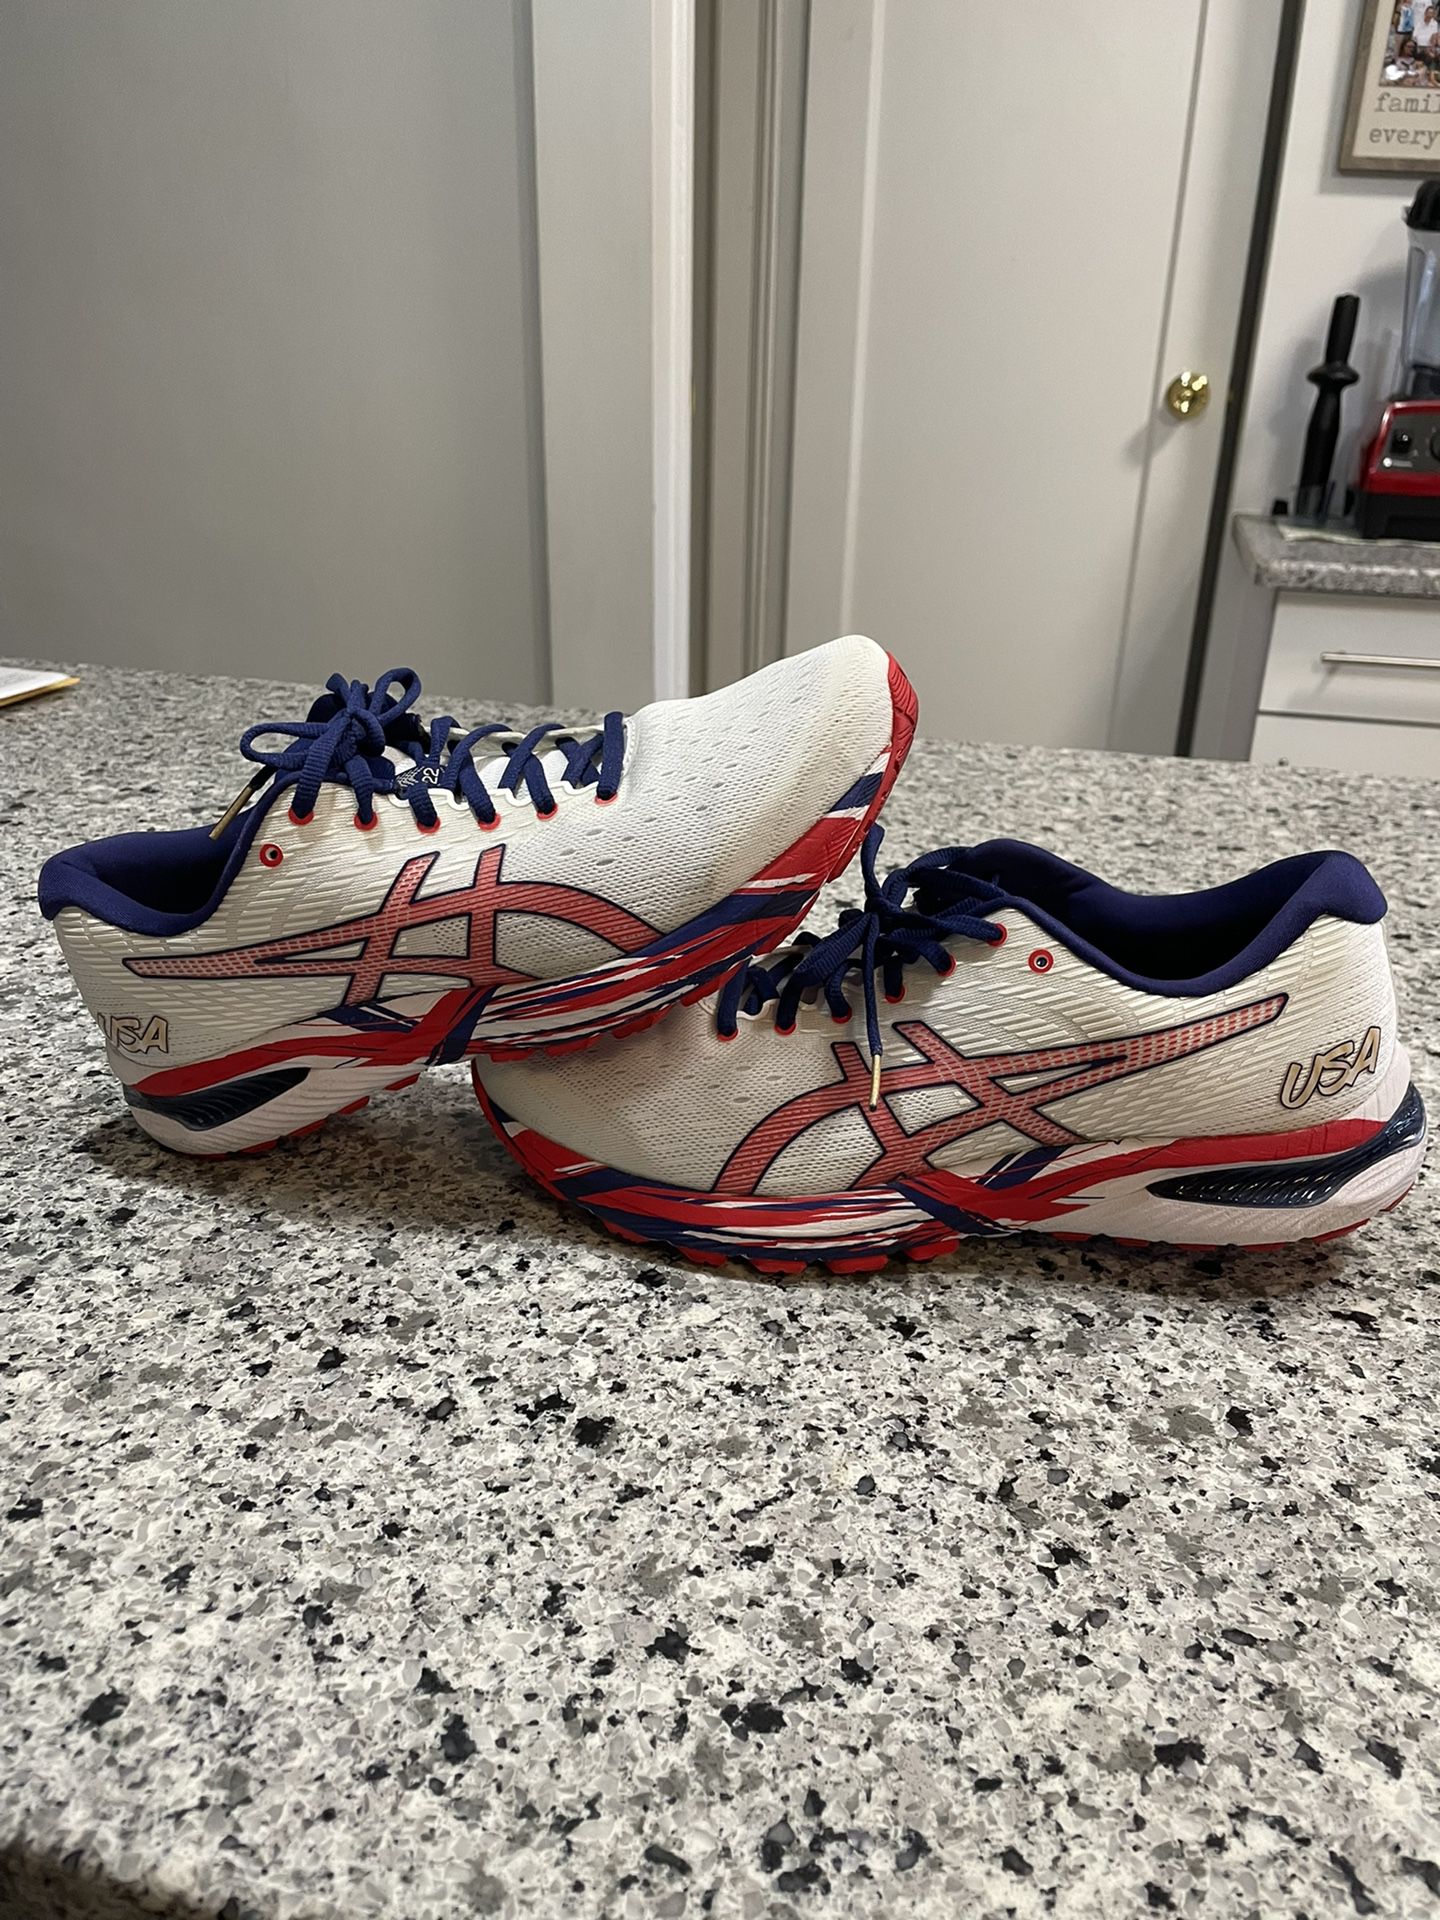 Like New In Box Patriotic USA Super Weight ASICS GEL-CUMULUS 22 Training Shoes Sneakers Size 11M for Sale Queens, NY - OfferUp